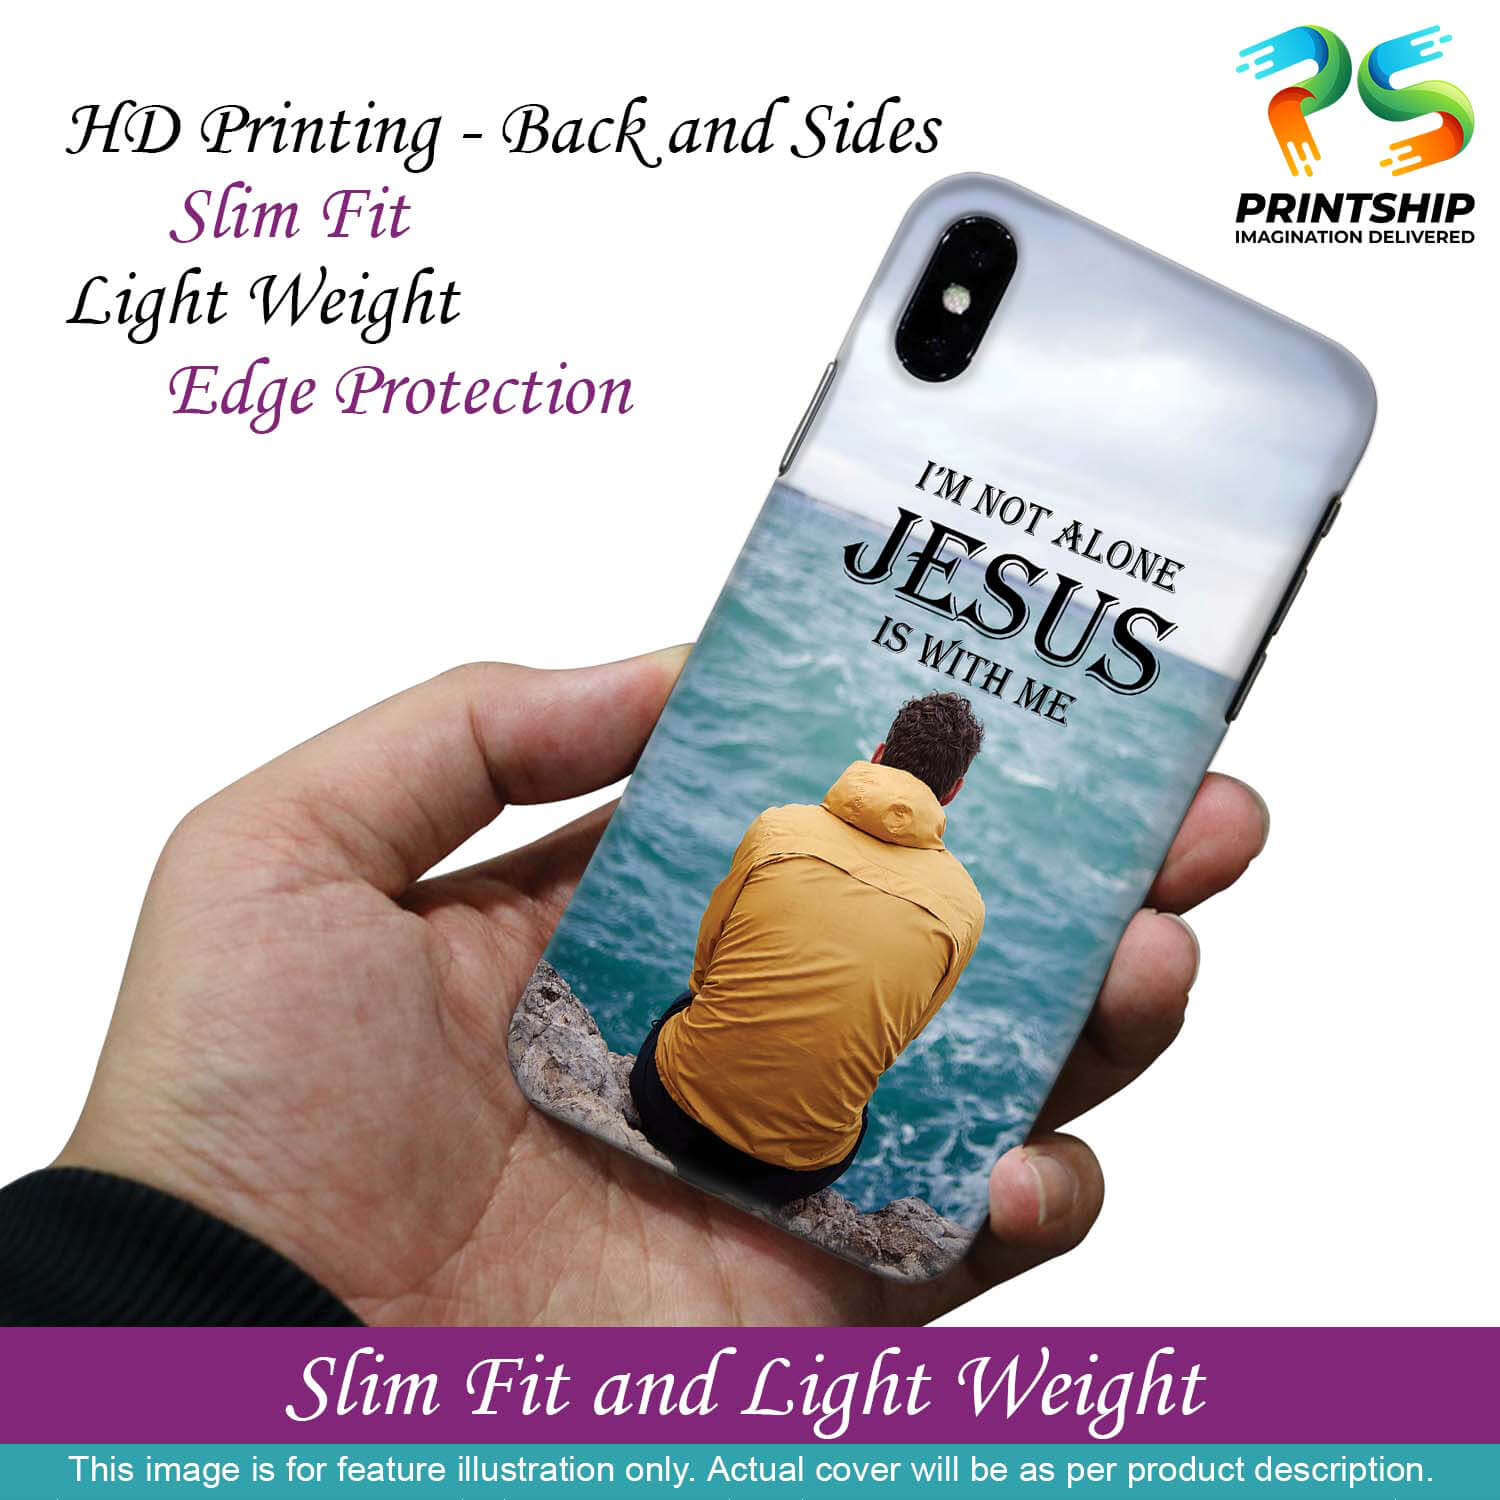 W0007-Jesus is with Me Back Cover for Apple iPhone 13